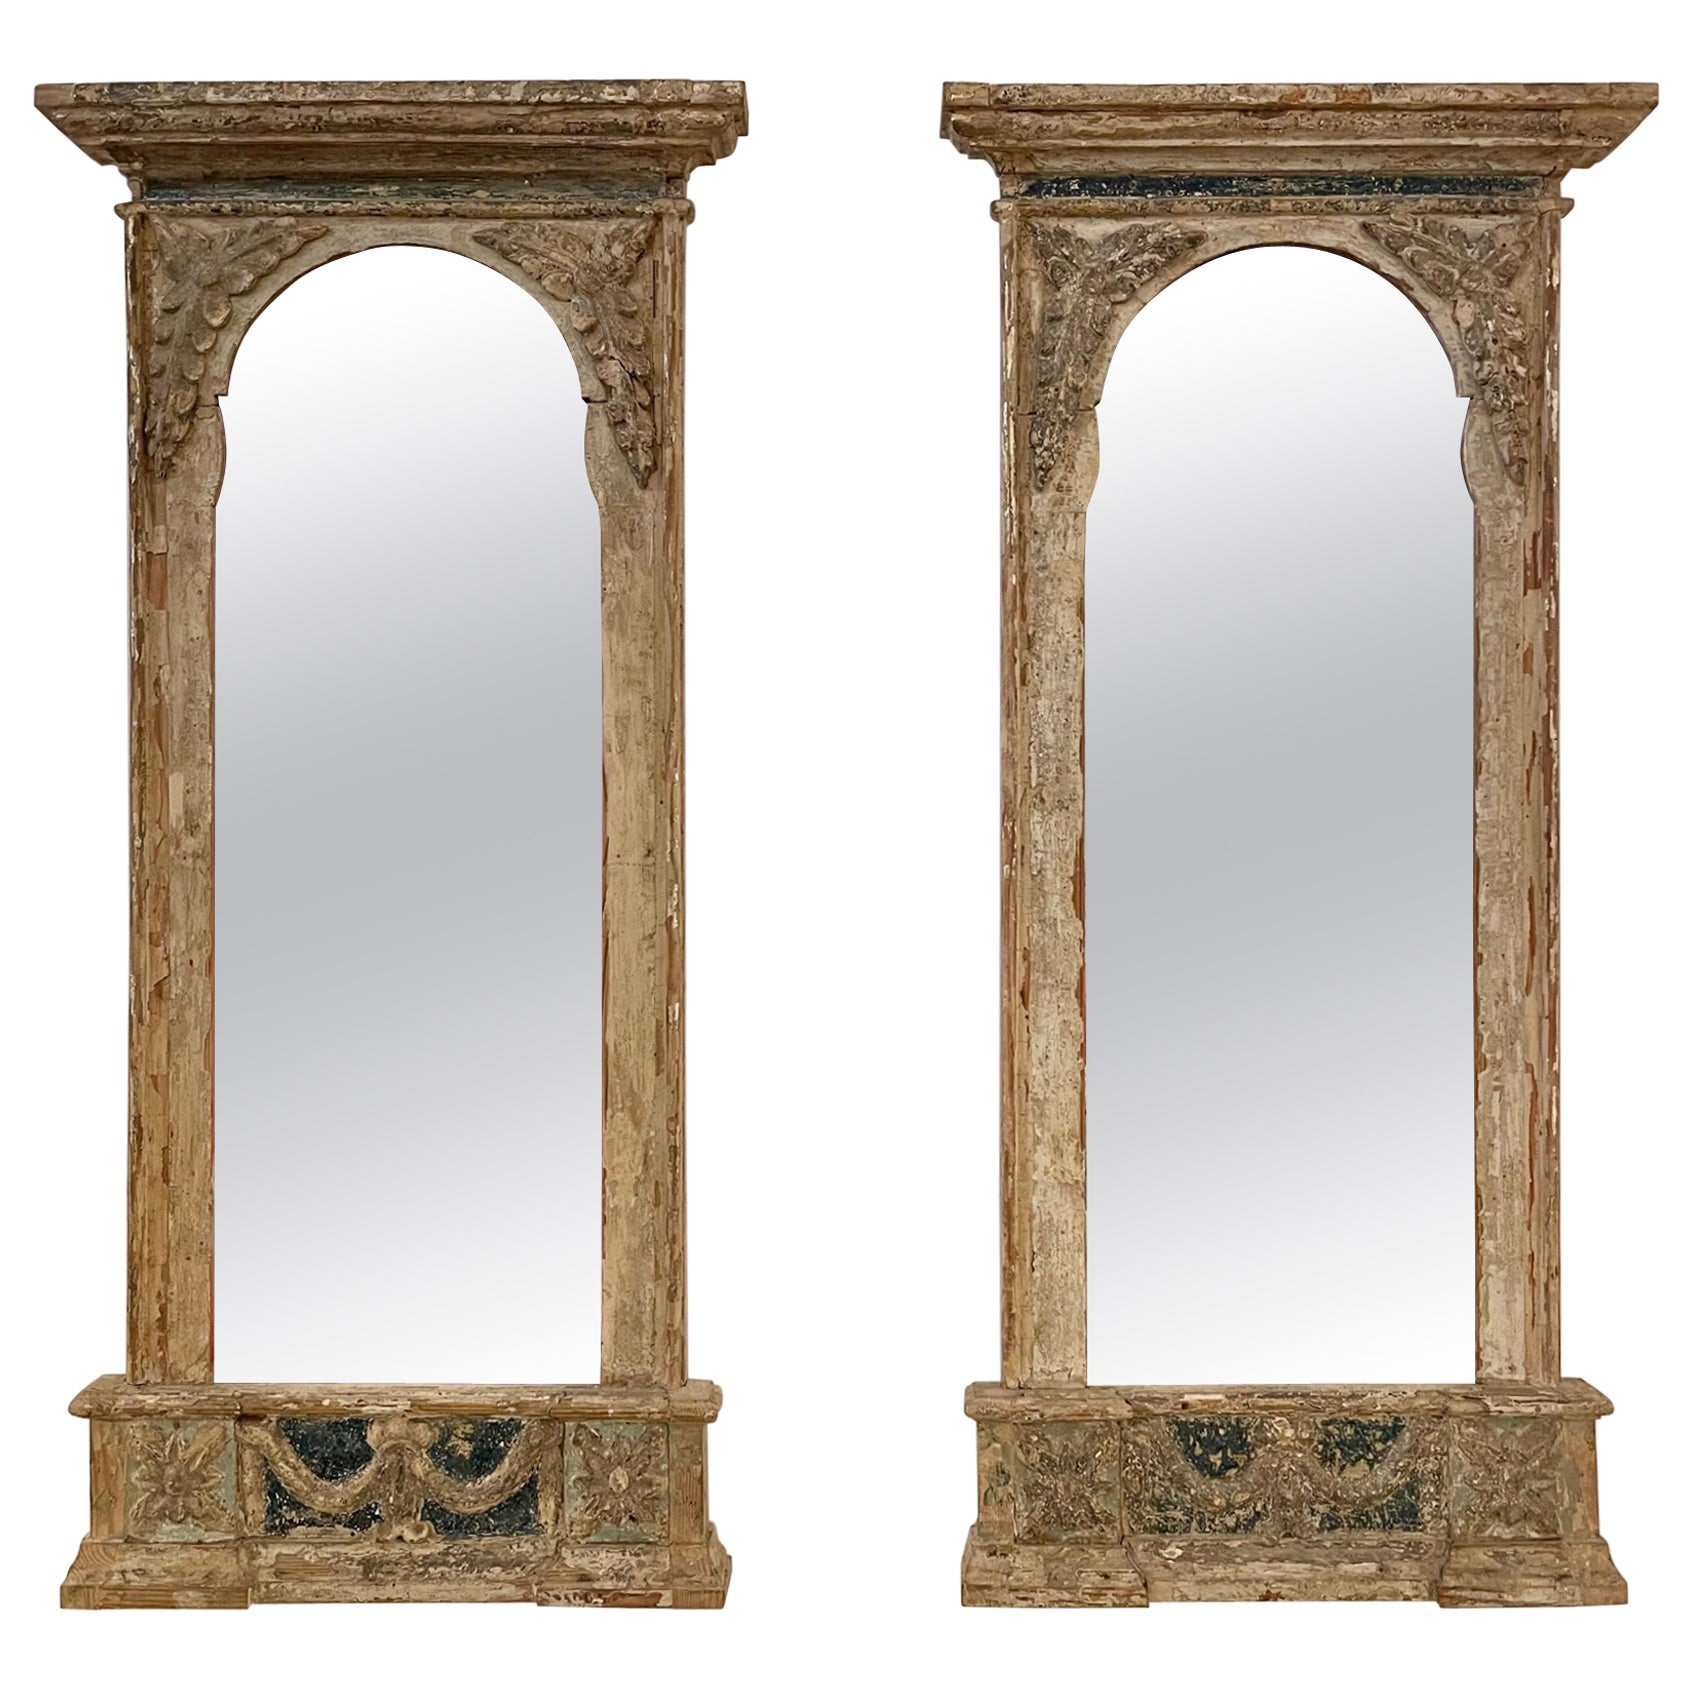 Portuguese 17th C Pier Mirror, Two Available